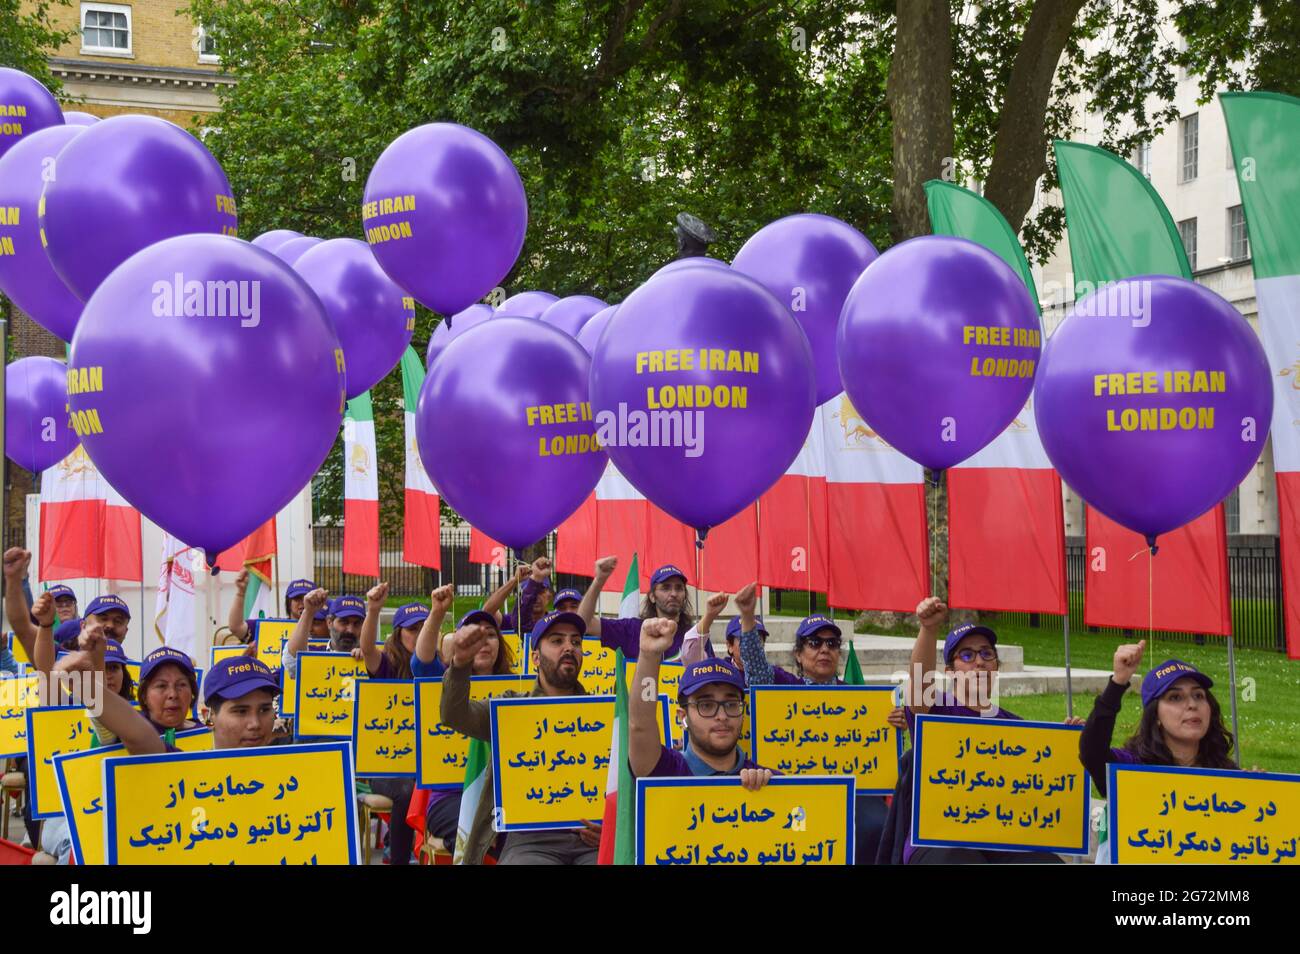 London, UK. 10th July, 2021. Protesters gesture while holding placards among balloons with the slogan 'Free Iran London' during the Free Iran World Summit in London. Demonstrators gathered outside Downing Street to protest against the Iran regime and in support of Maryam Rajavi, the leader of the People's Mujahedin of Iran (MEK). Credit: SOPA Images Limited/Alamy Live News Stock Photo